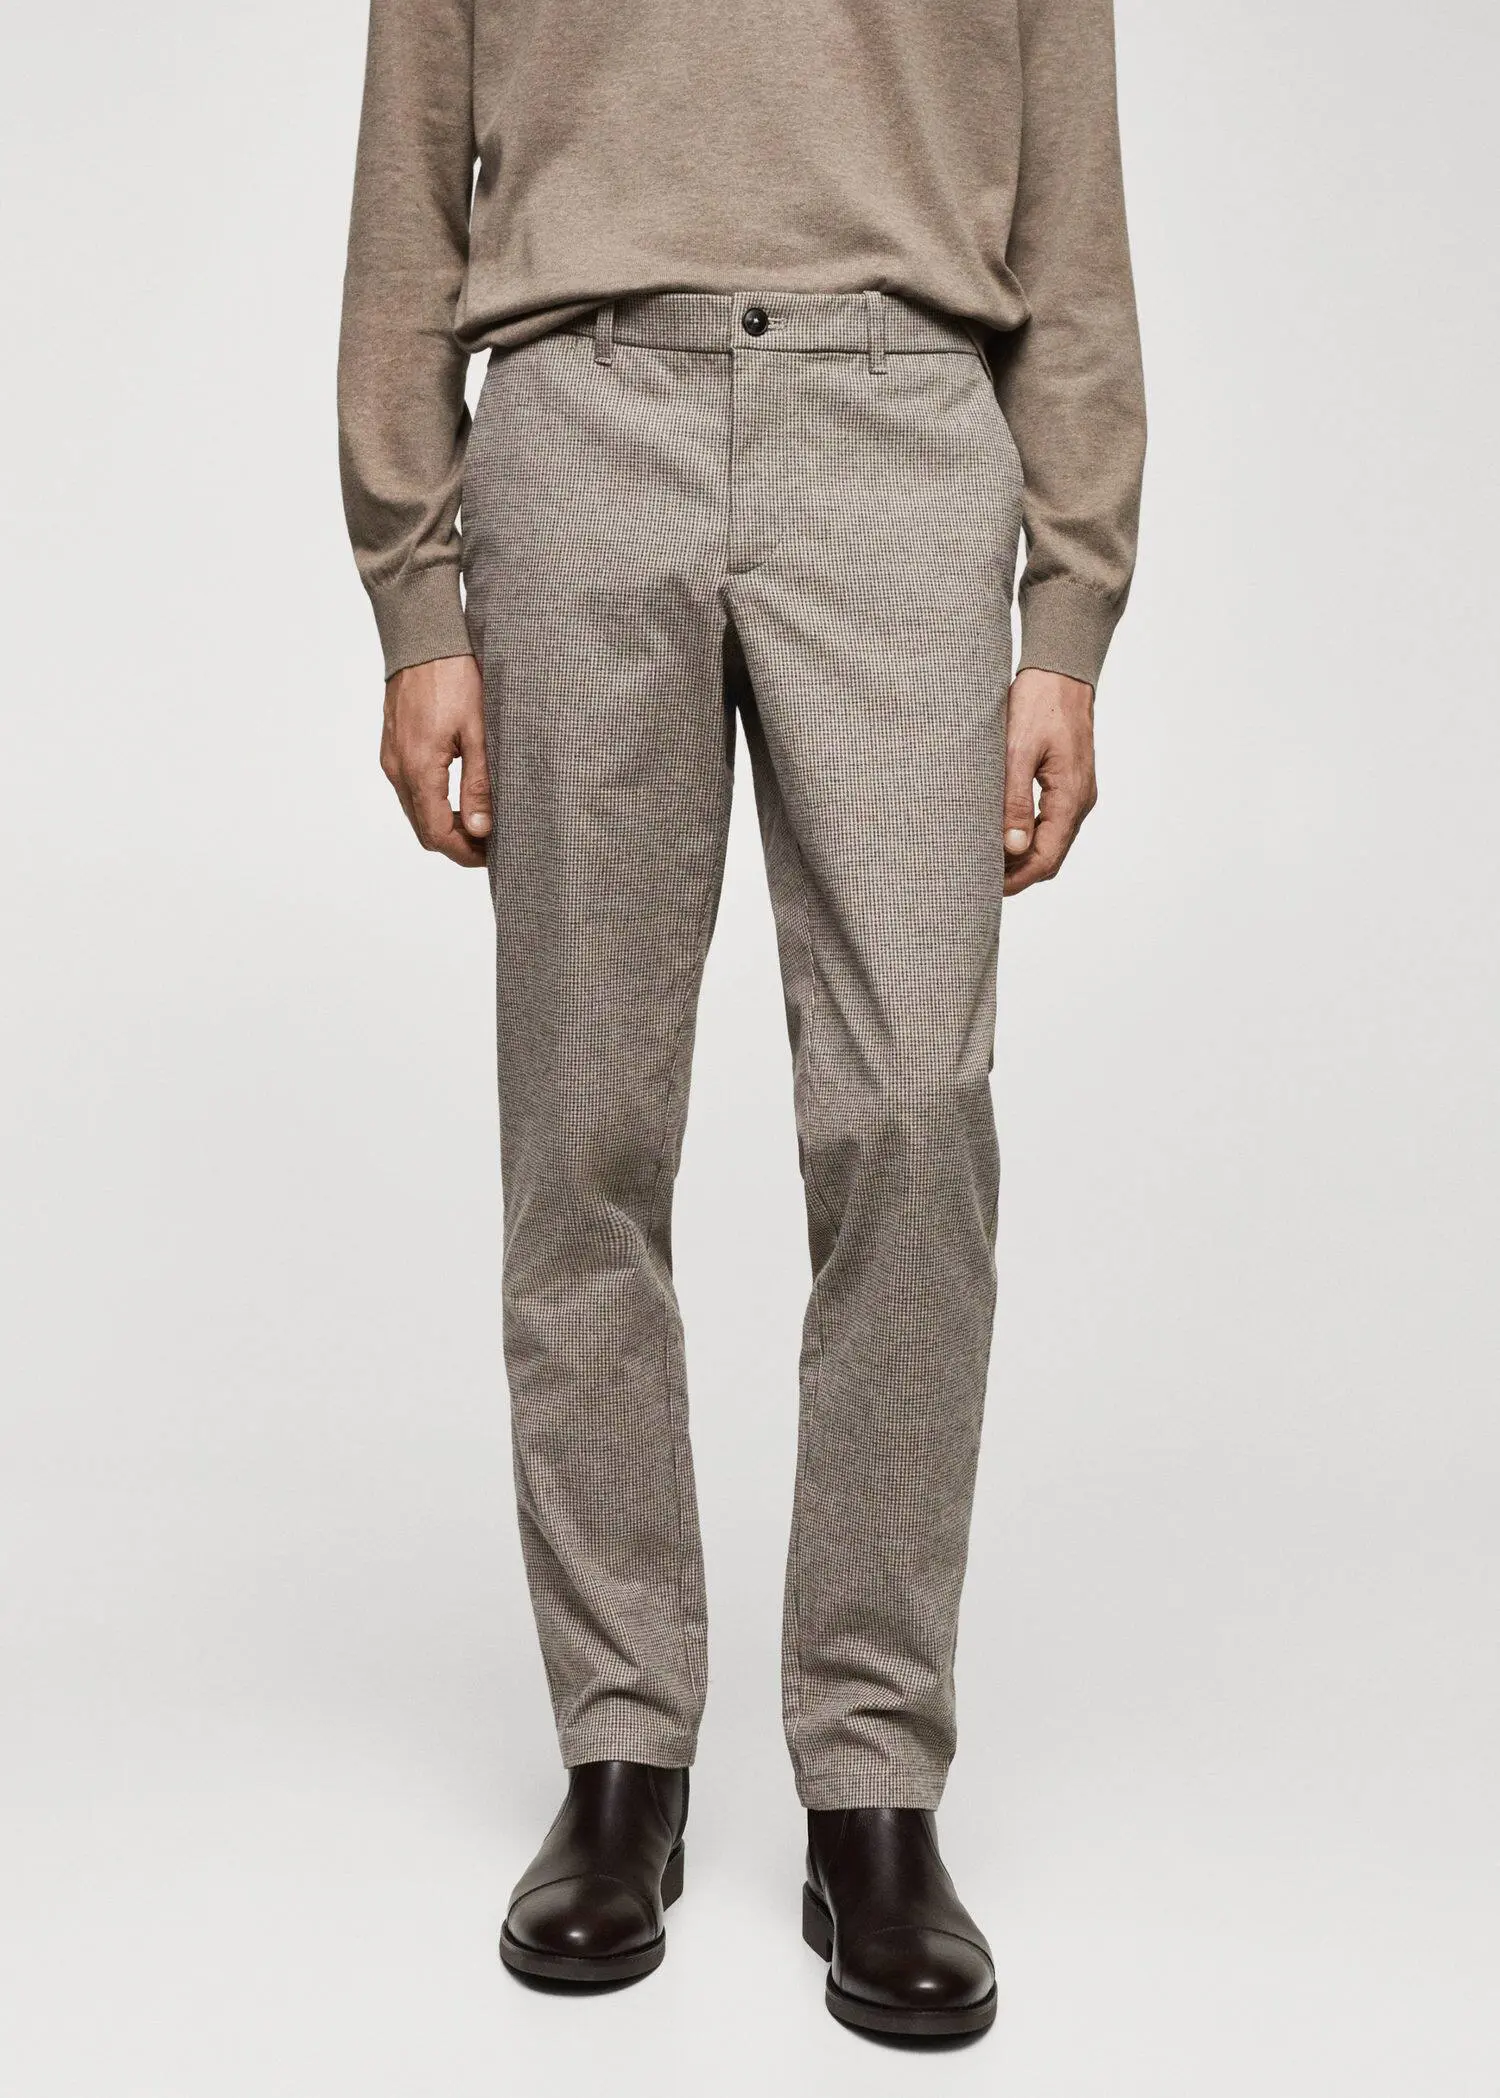 Mango Slim-fit cotton micro-houndstooth slim-fit trousers. 2